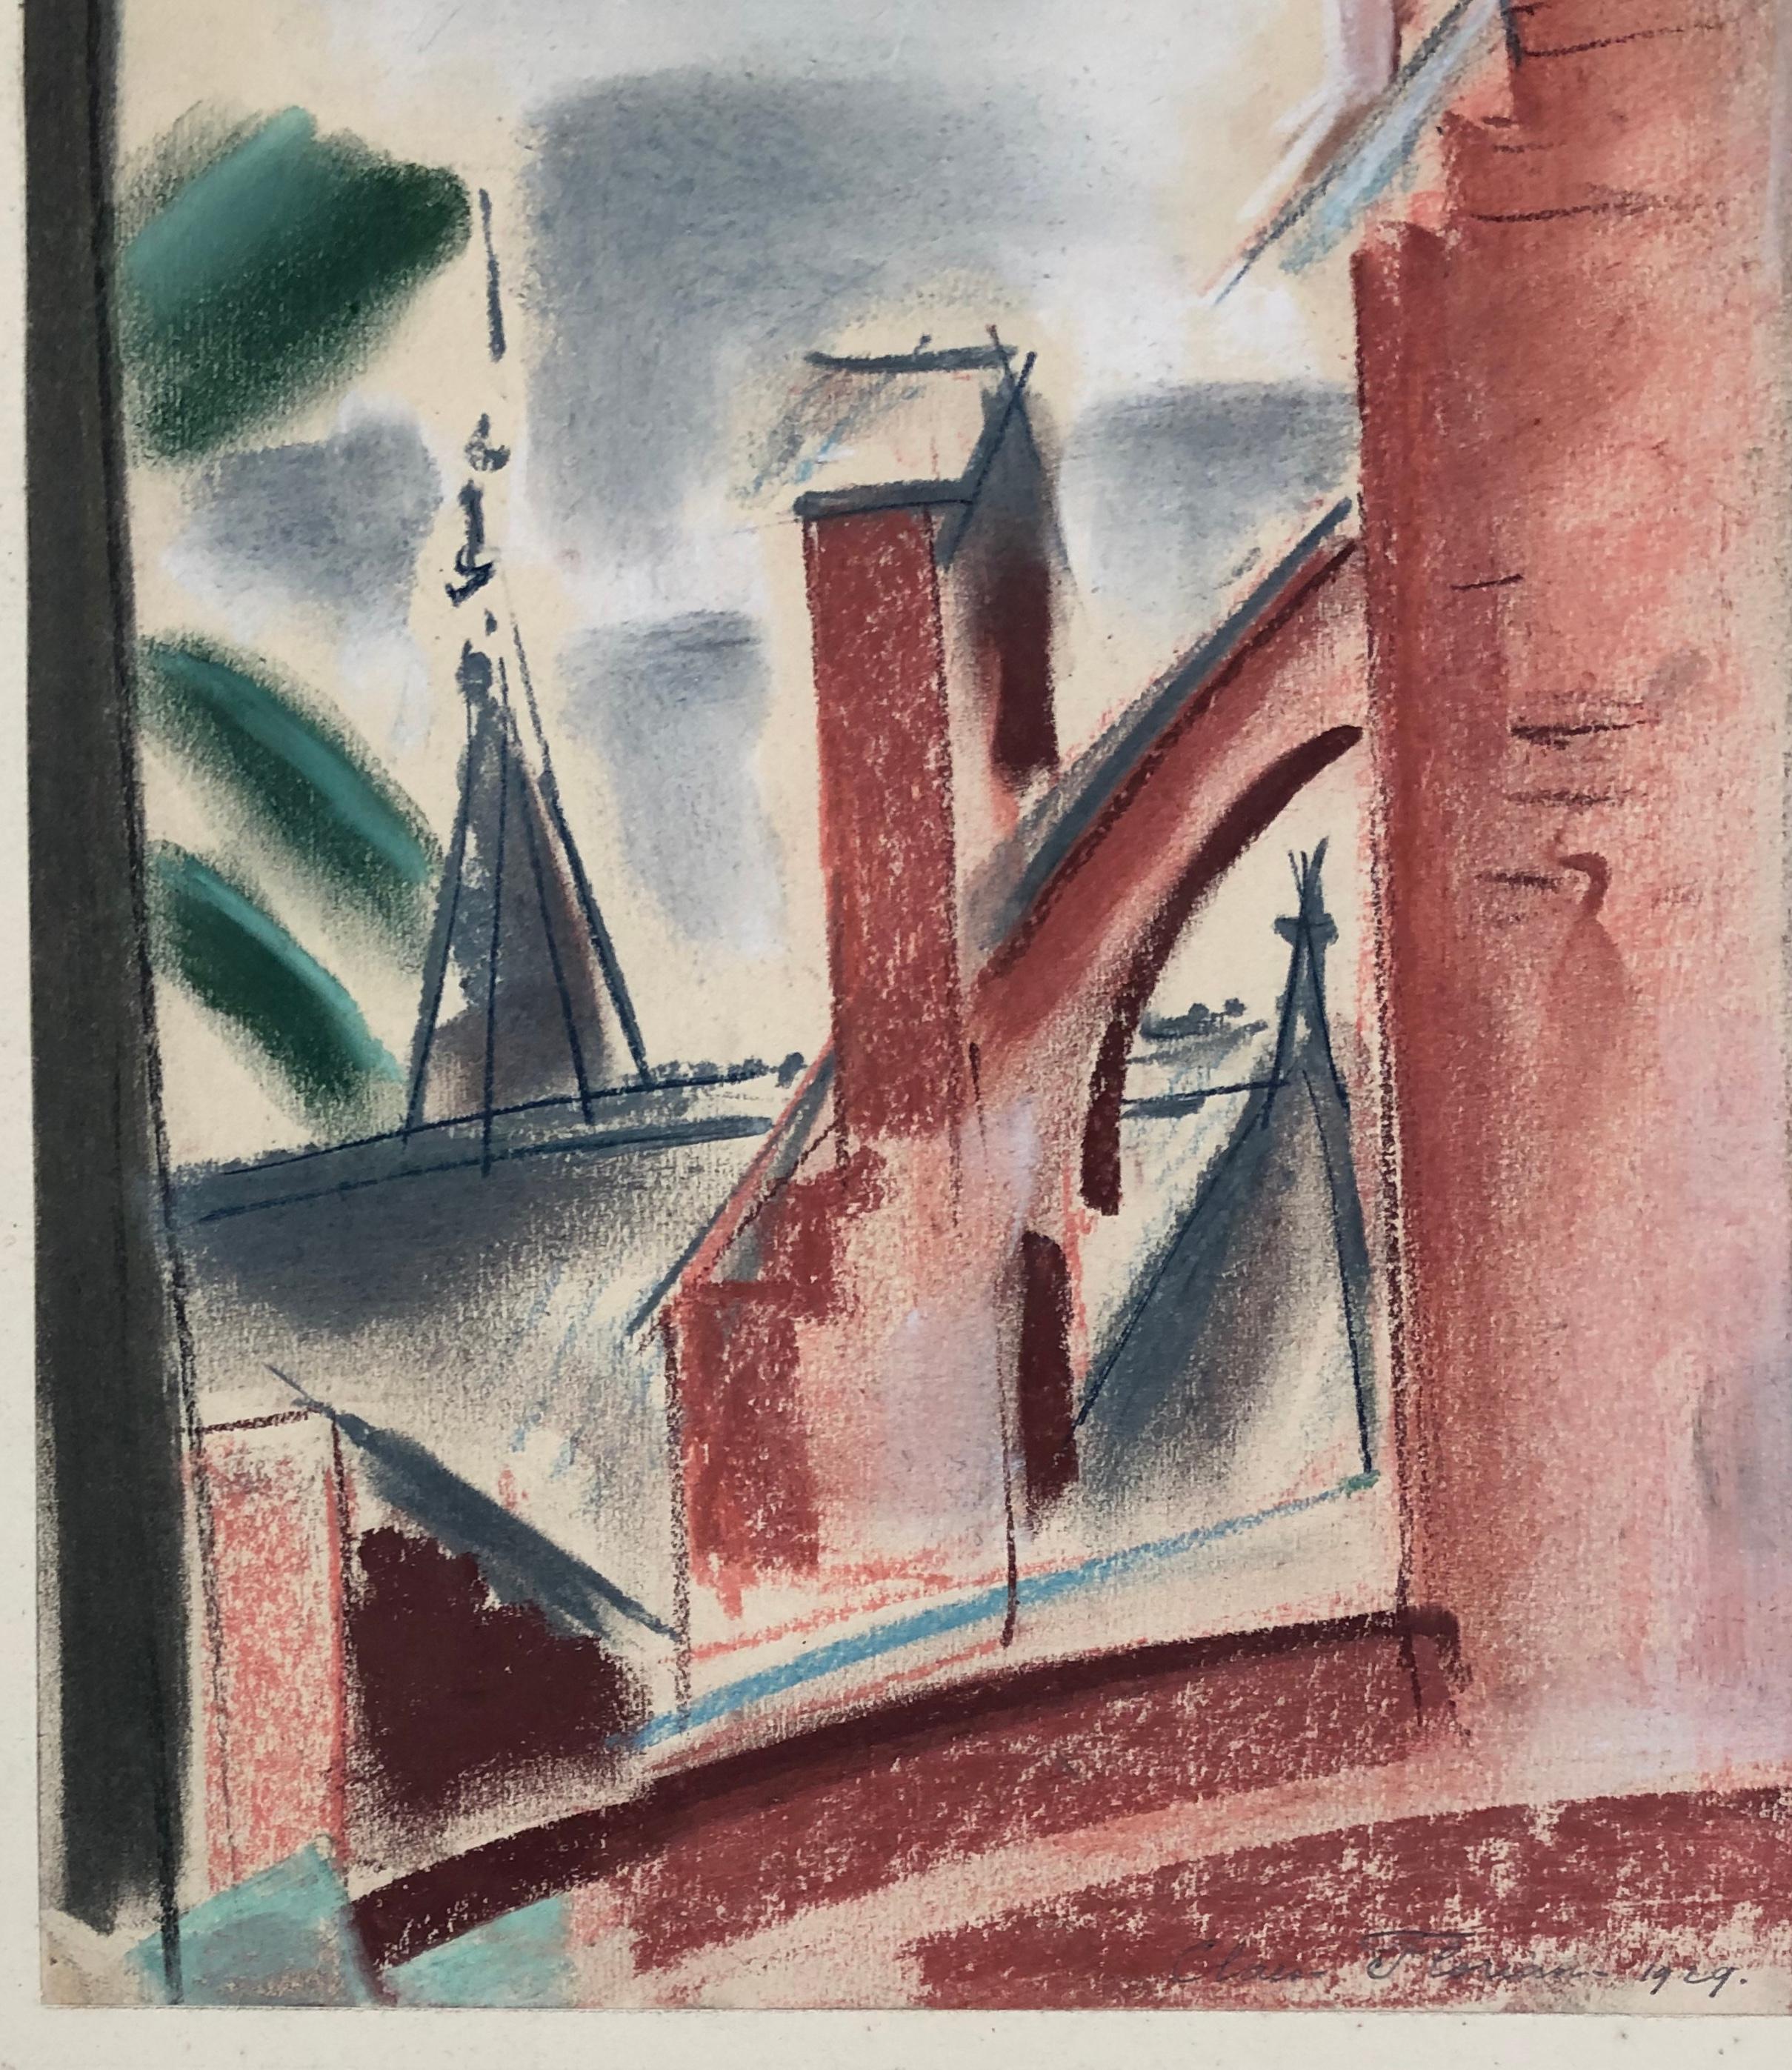 CLAES-THOBOIS Albert. Roof view. Pastel. Signed and dated 1929. 1